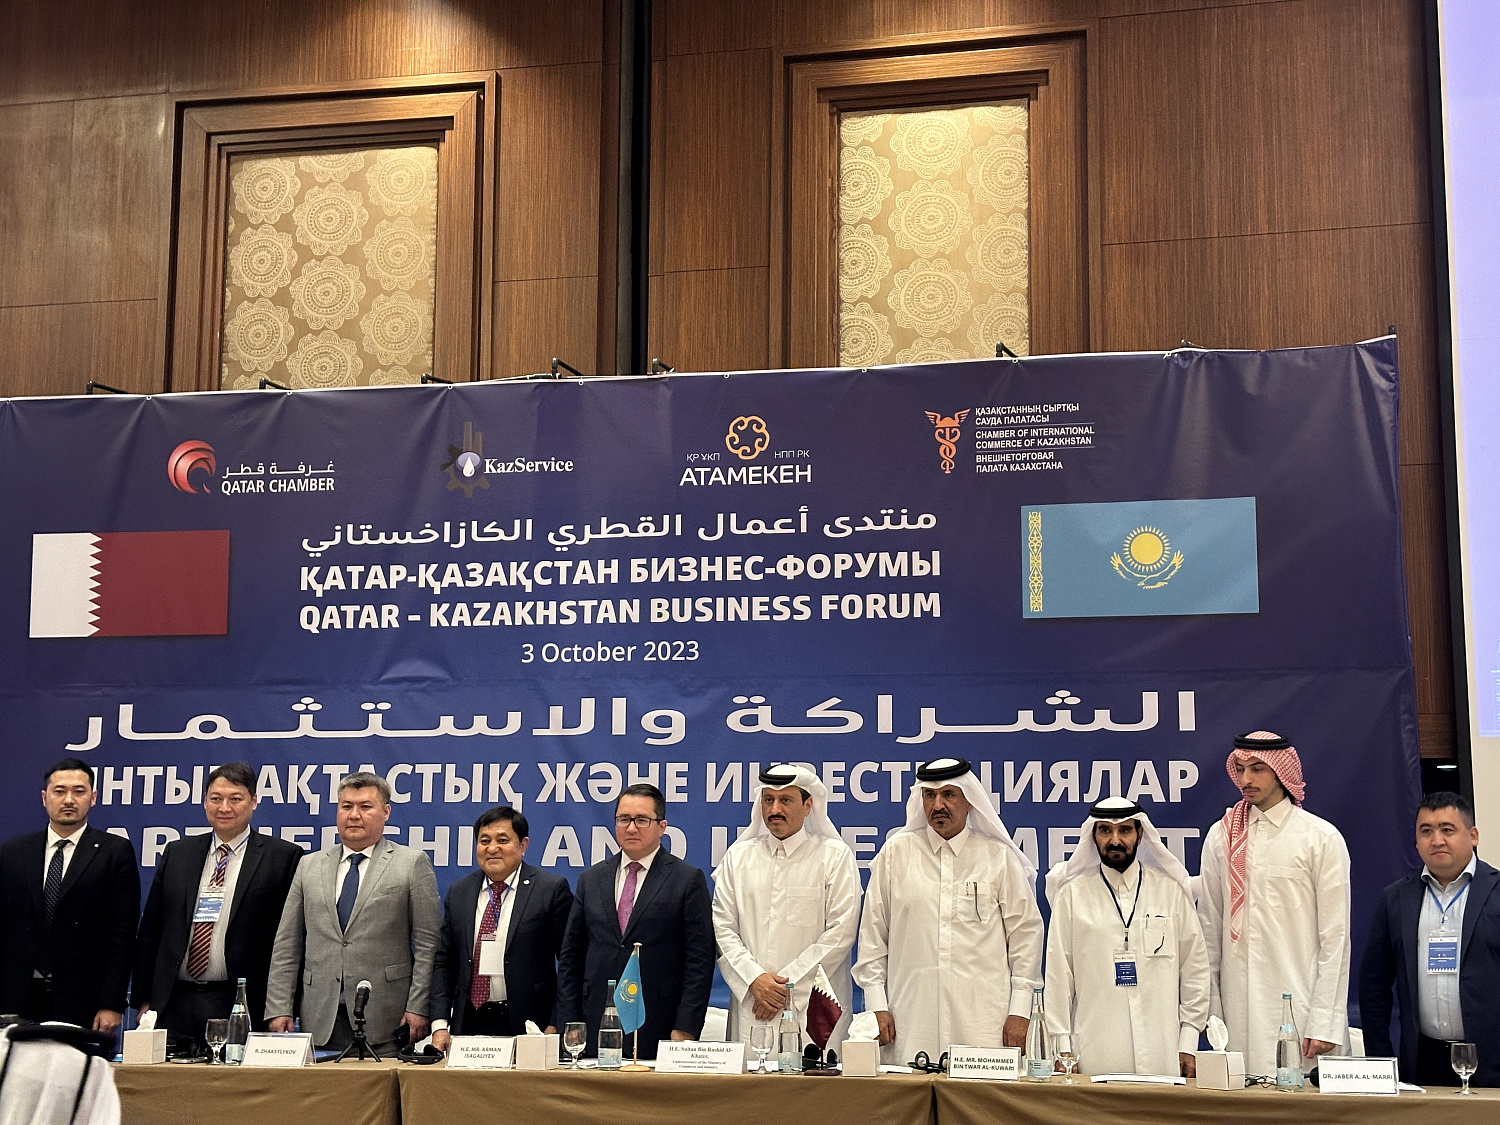 Our company heads participated at the business forum in Doha, Qatar